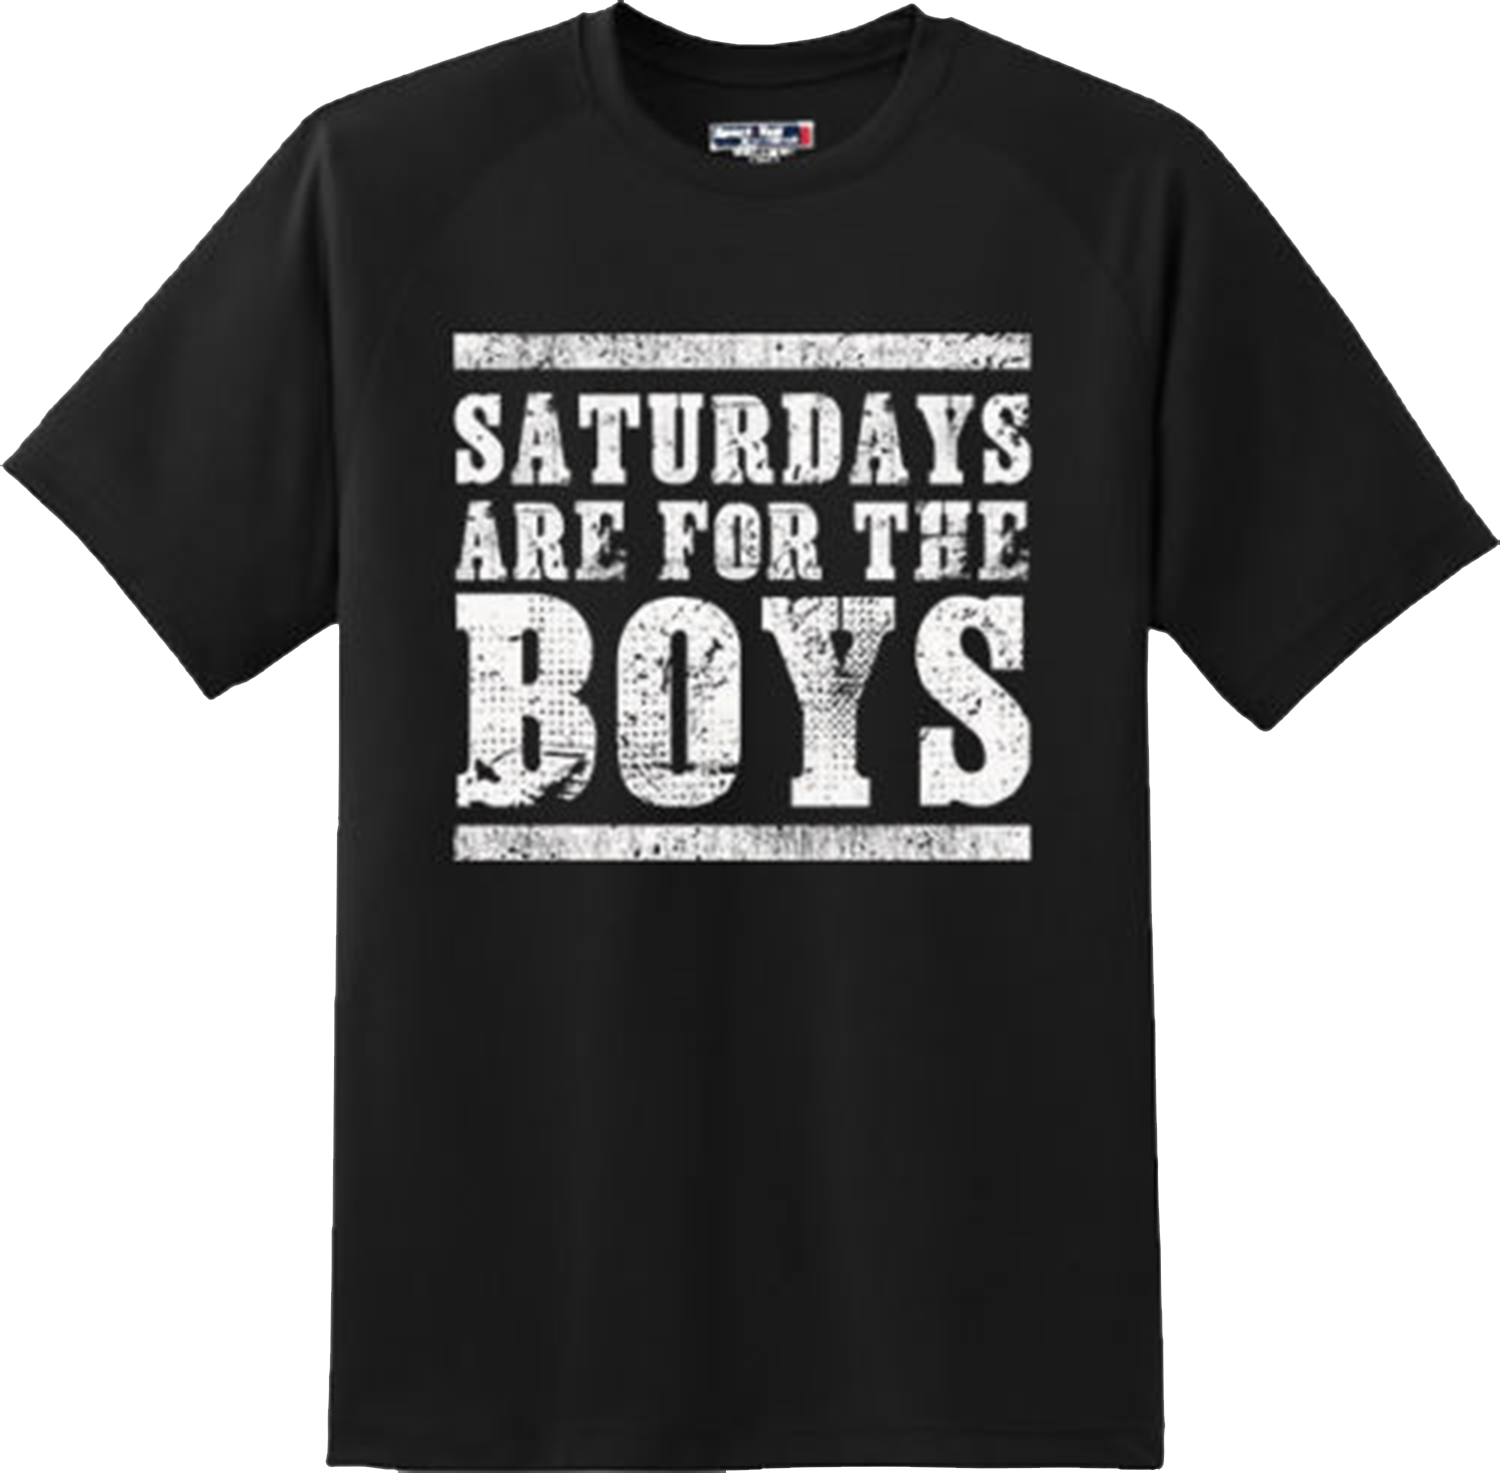 Funny Saturdays are for boys Humor Weekend College Party Gift T Shirt New Tee